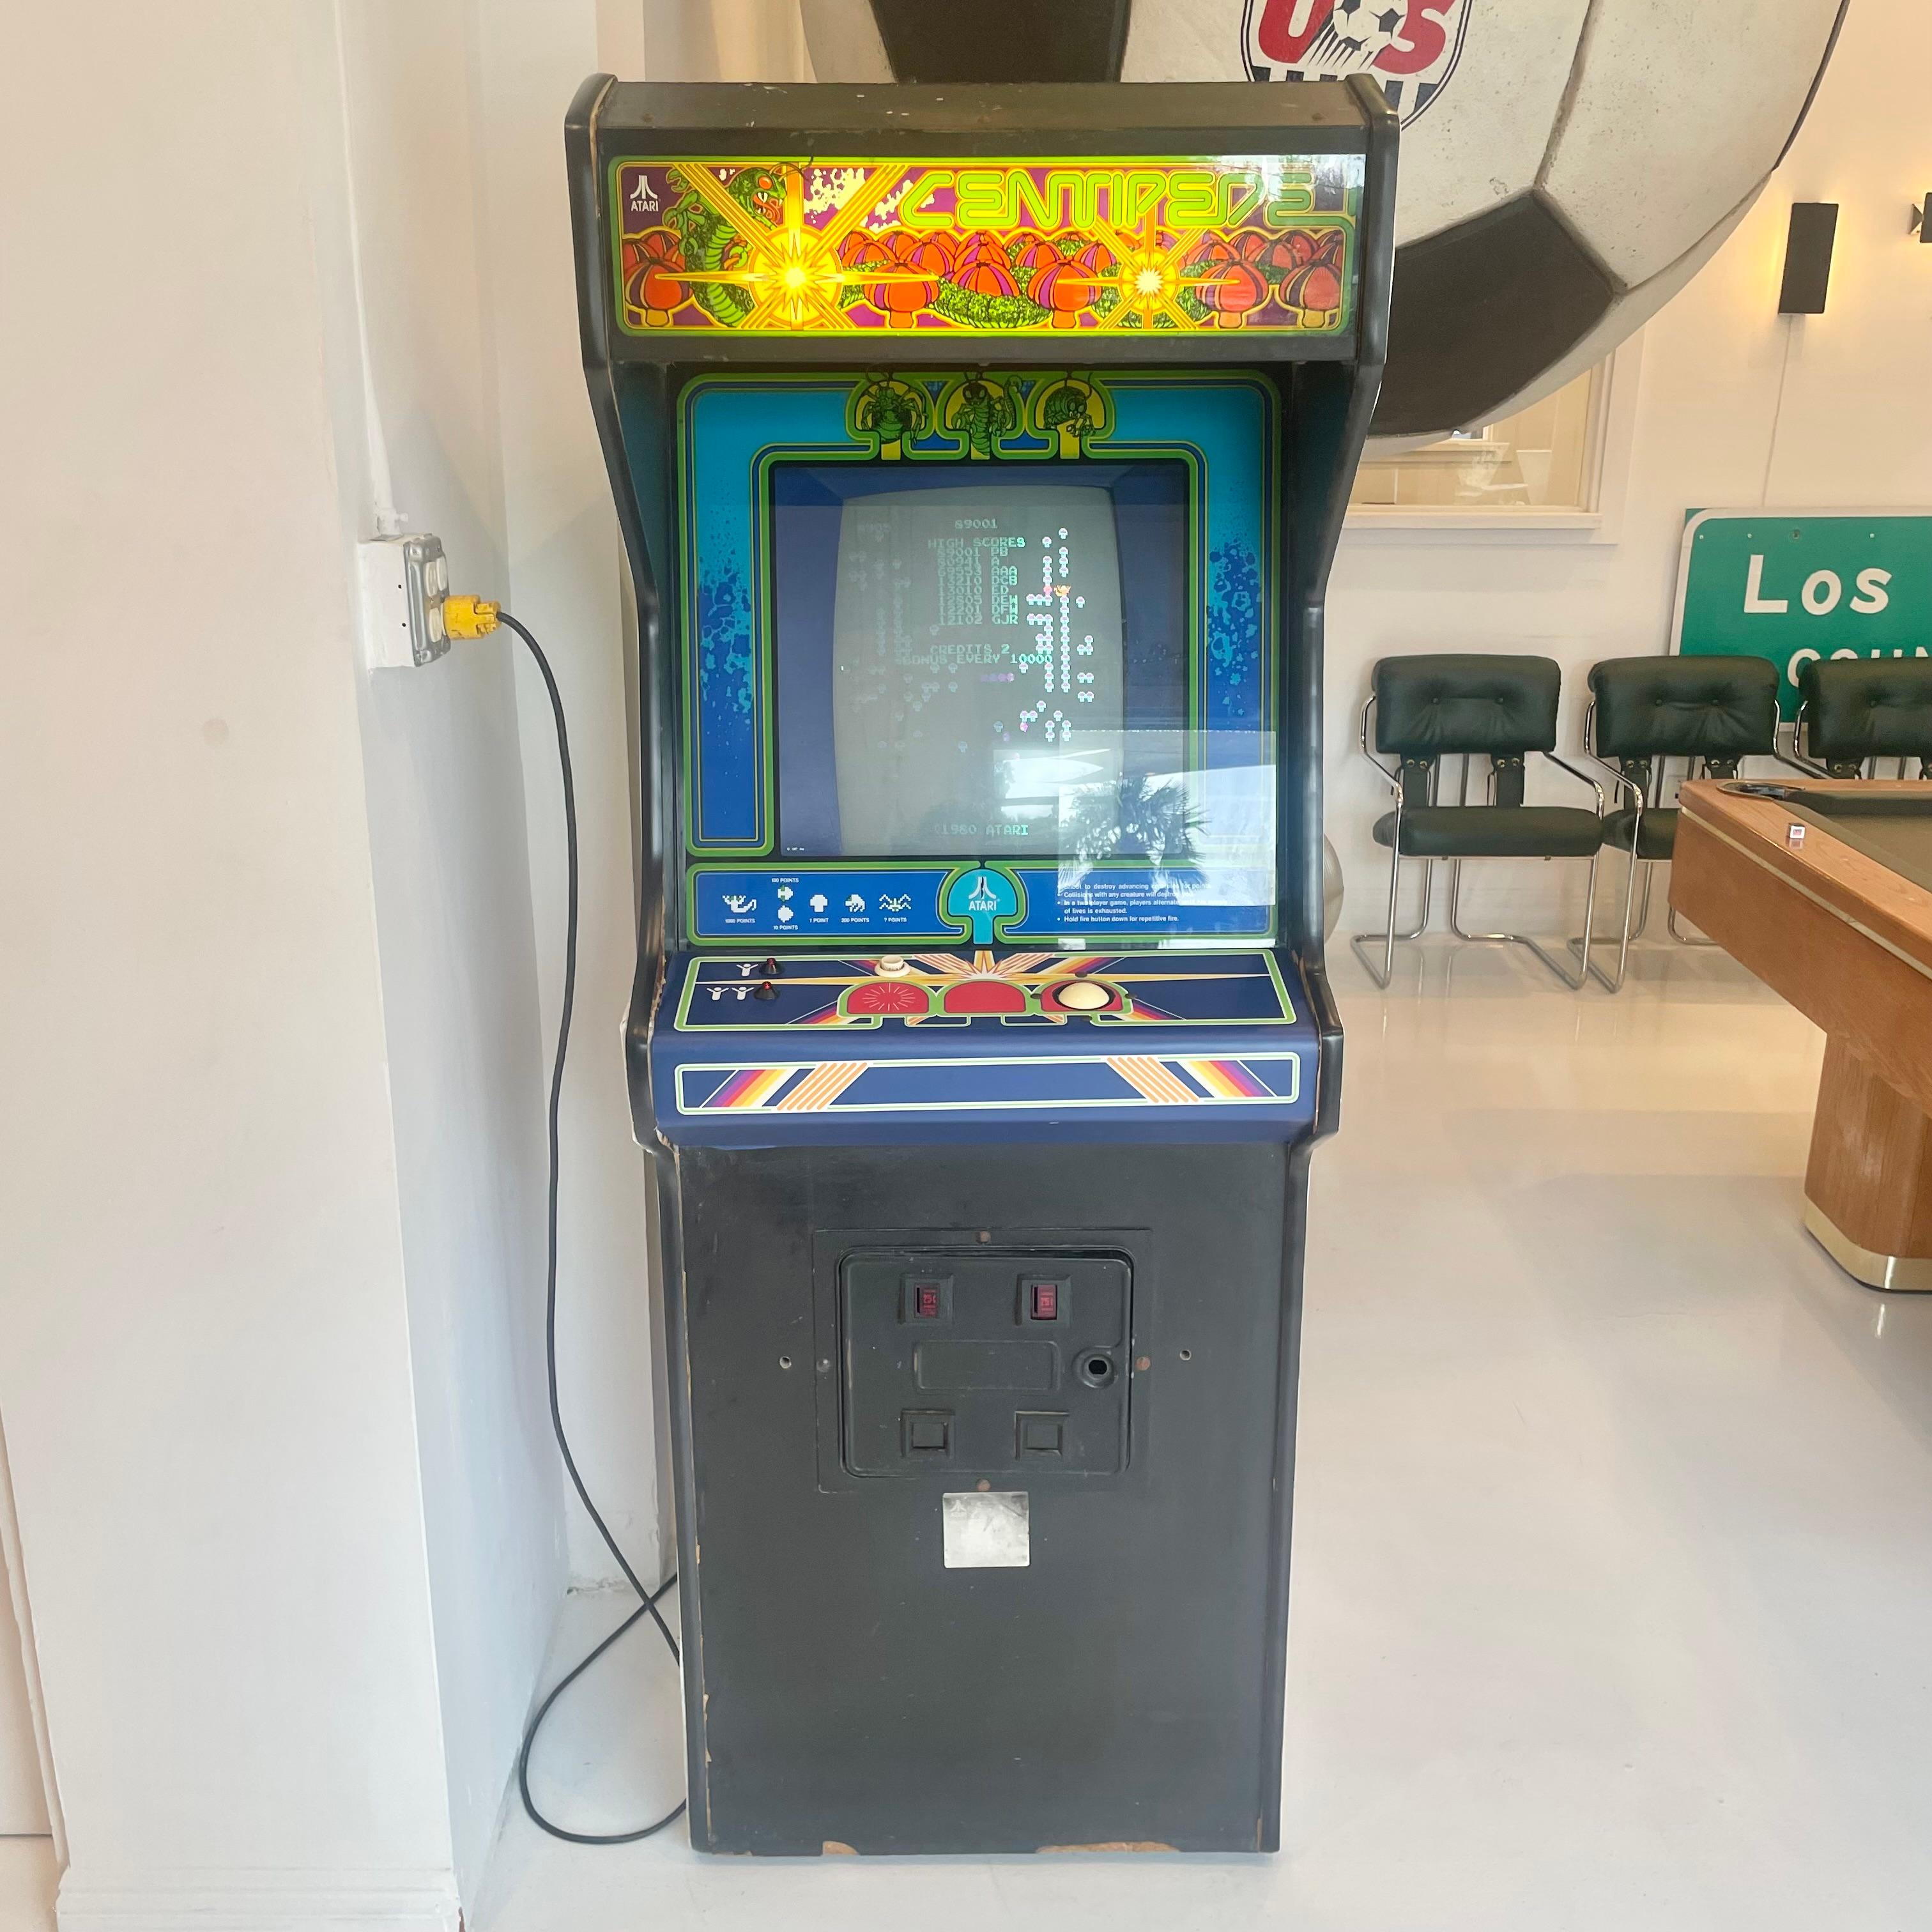 Vintage 'CENTIPEDE' arcade game from 1980. Made by Atari and designed by Dona Bailey and Ed Logg. In excellent working condition. Great alien and intergalactic visuals as well as classic fixed shooter sounds. Extremely fast paced game speed and very